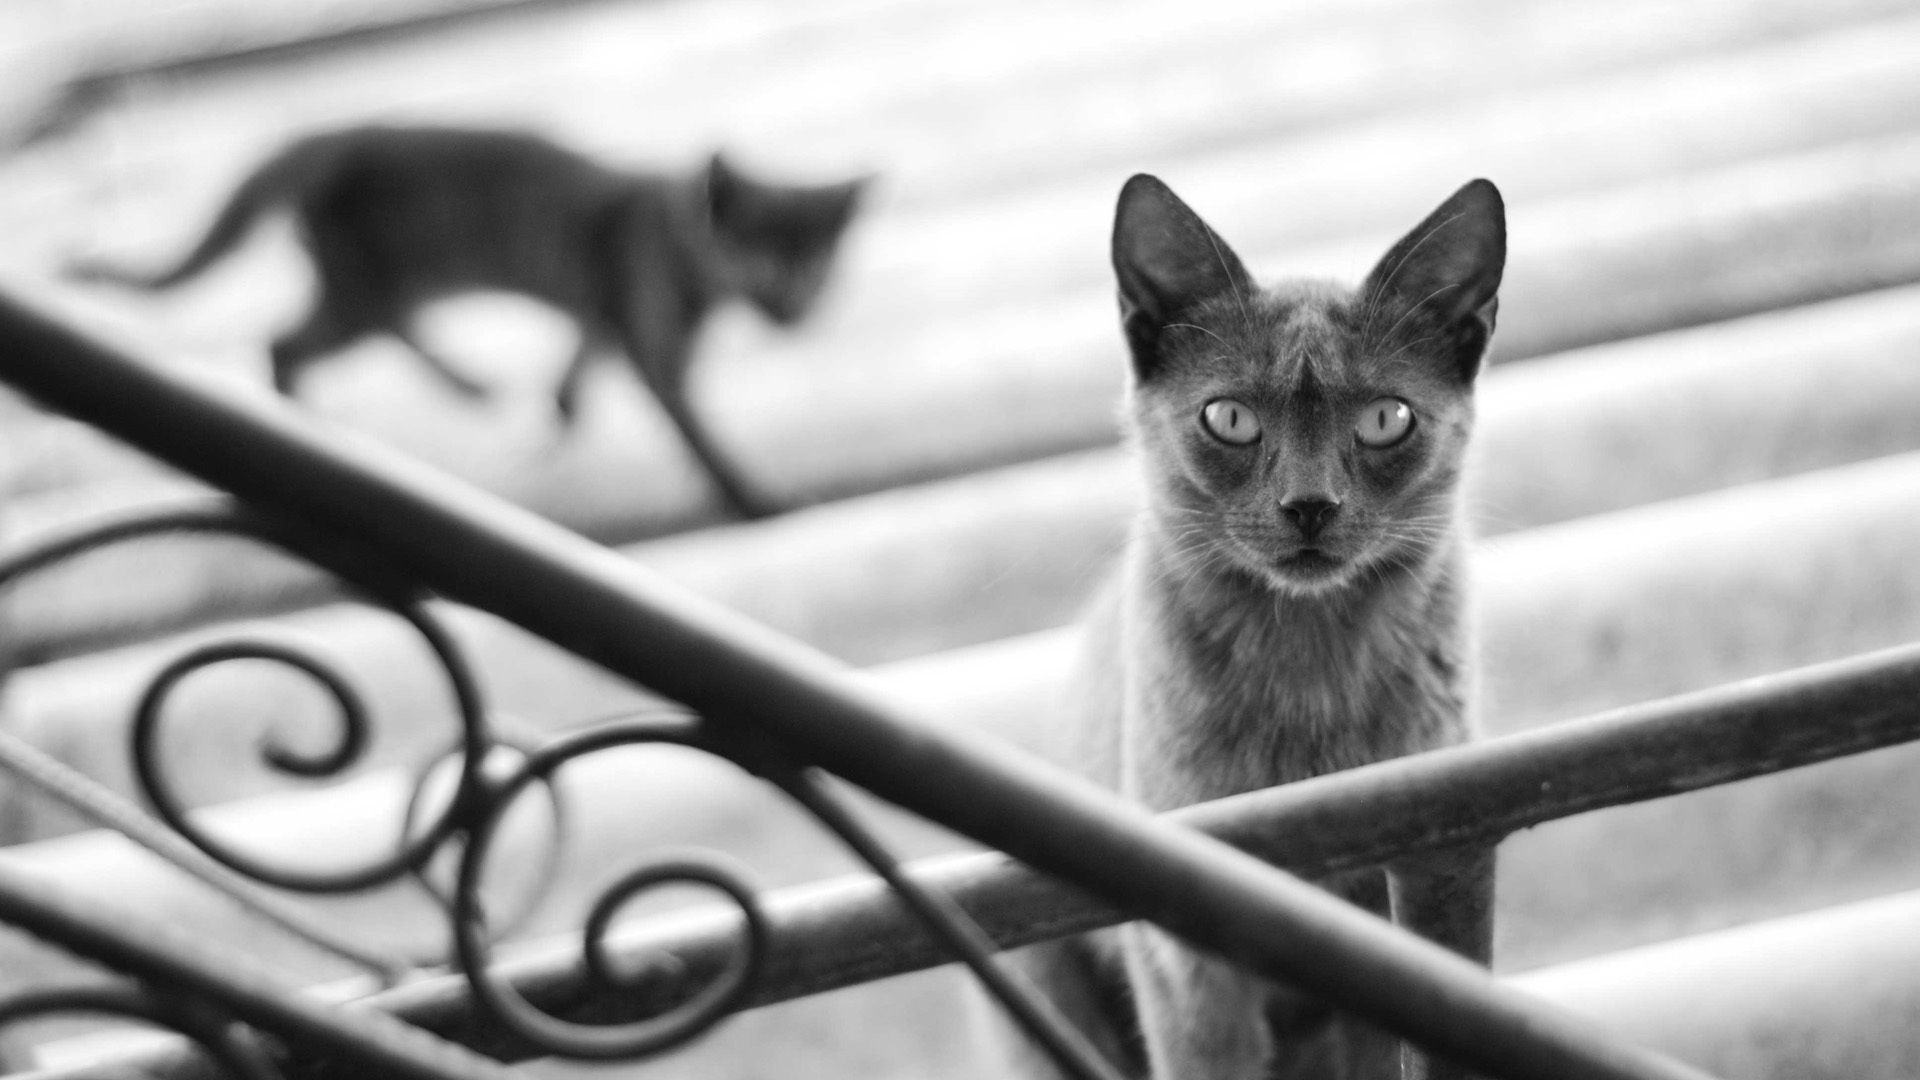 115029 Screensavers and Wallpapers Black And White for phone. Download animals, silhouette, cat, kitty, kitten, blur, smooth, shadow, grey, steps, railings, handrail, black and white pictures for free